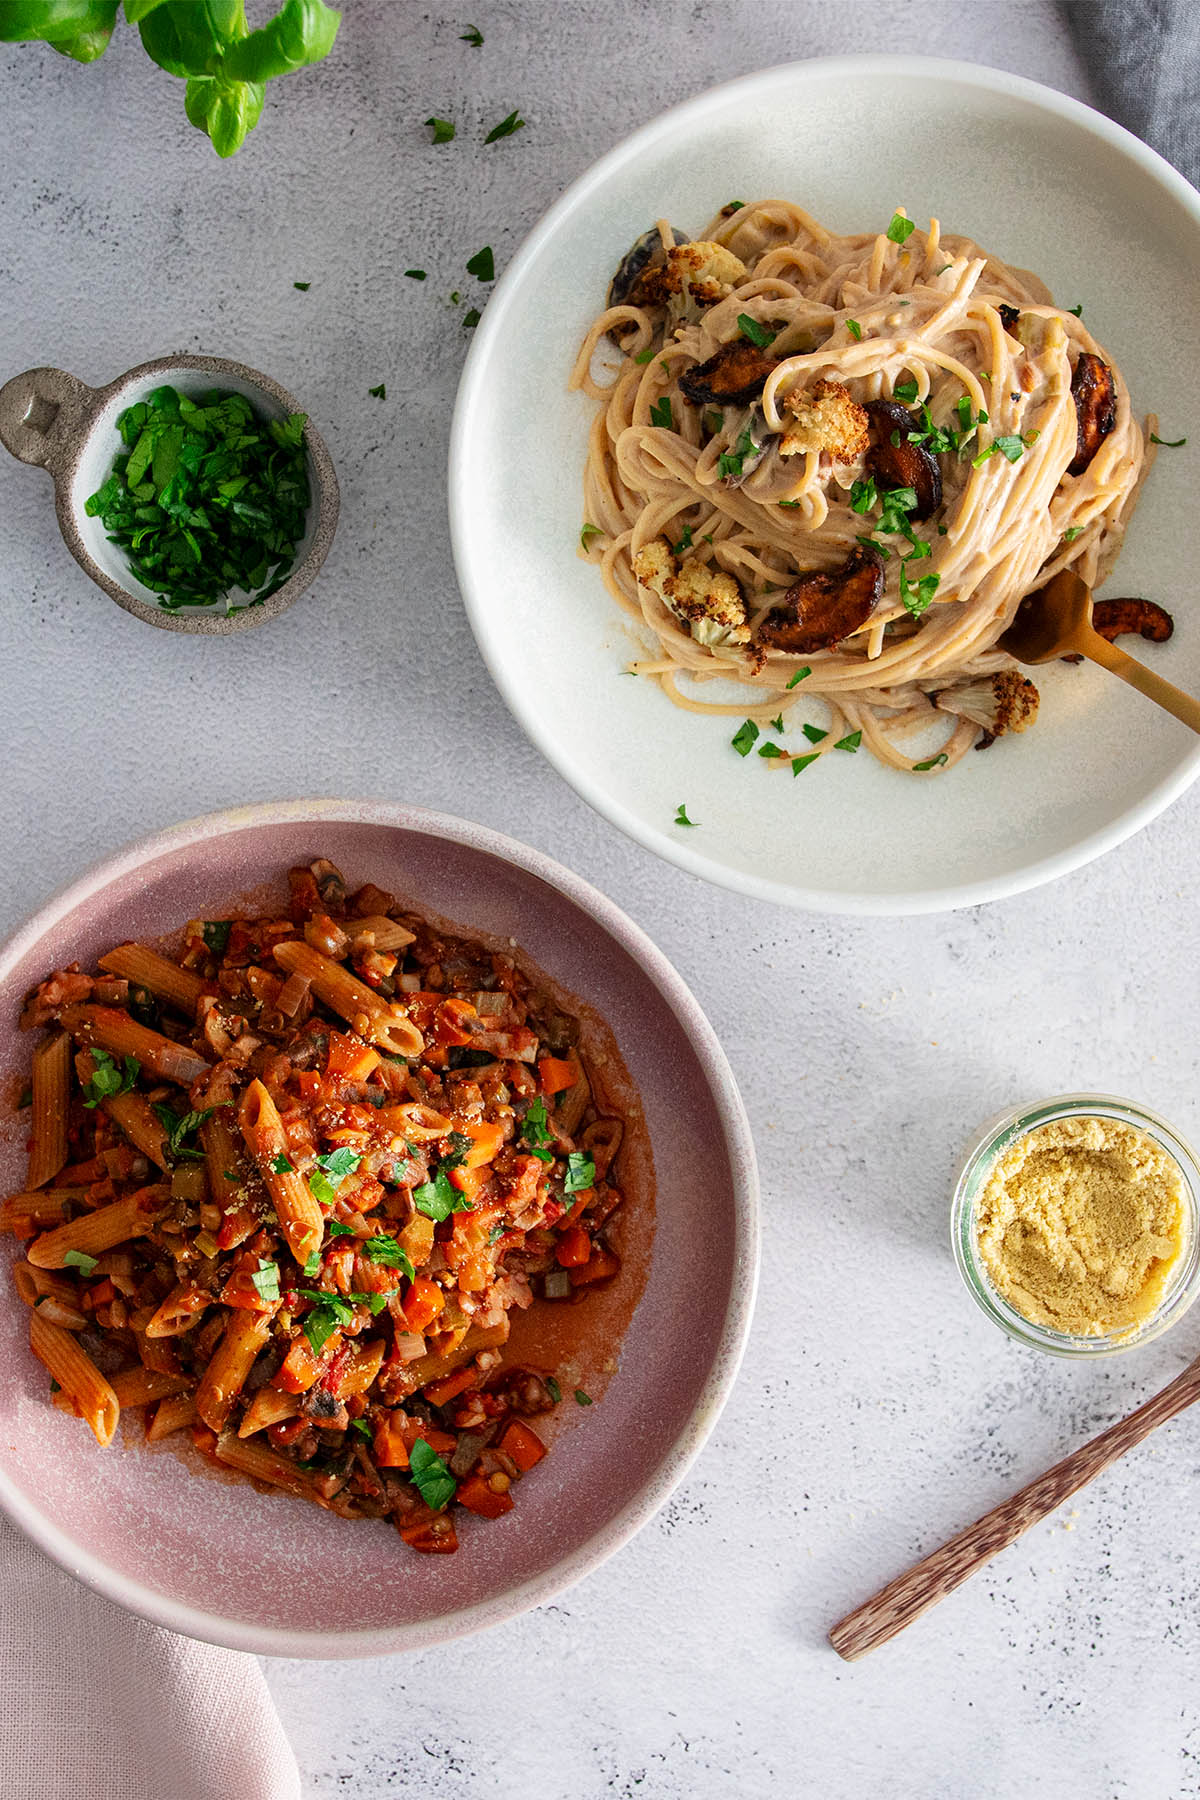 Vibrant, nourishing pasta dishes as featured in The Ultimate Plant-Based Cookbook by Sarah Cobacho